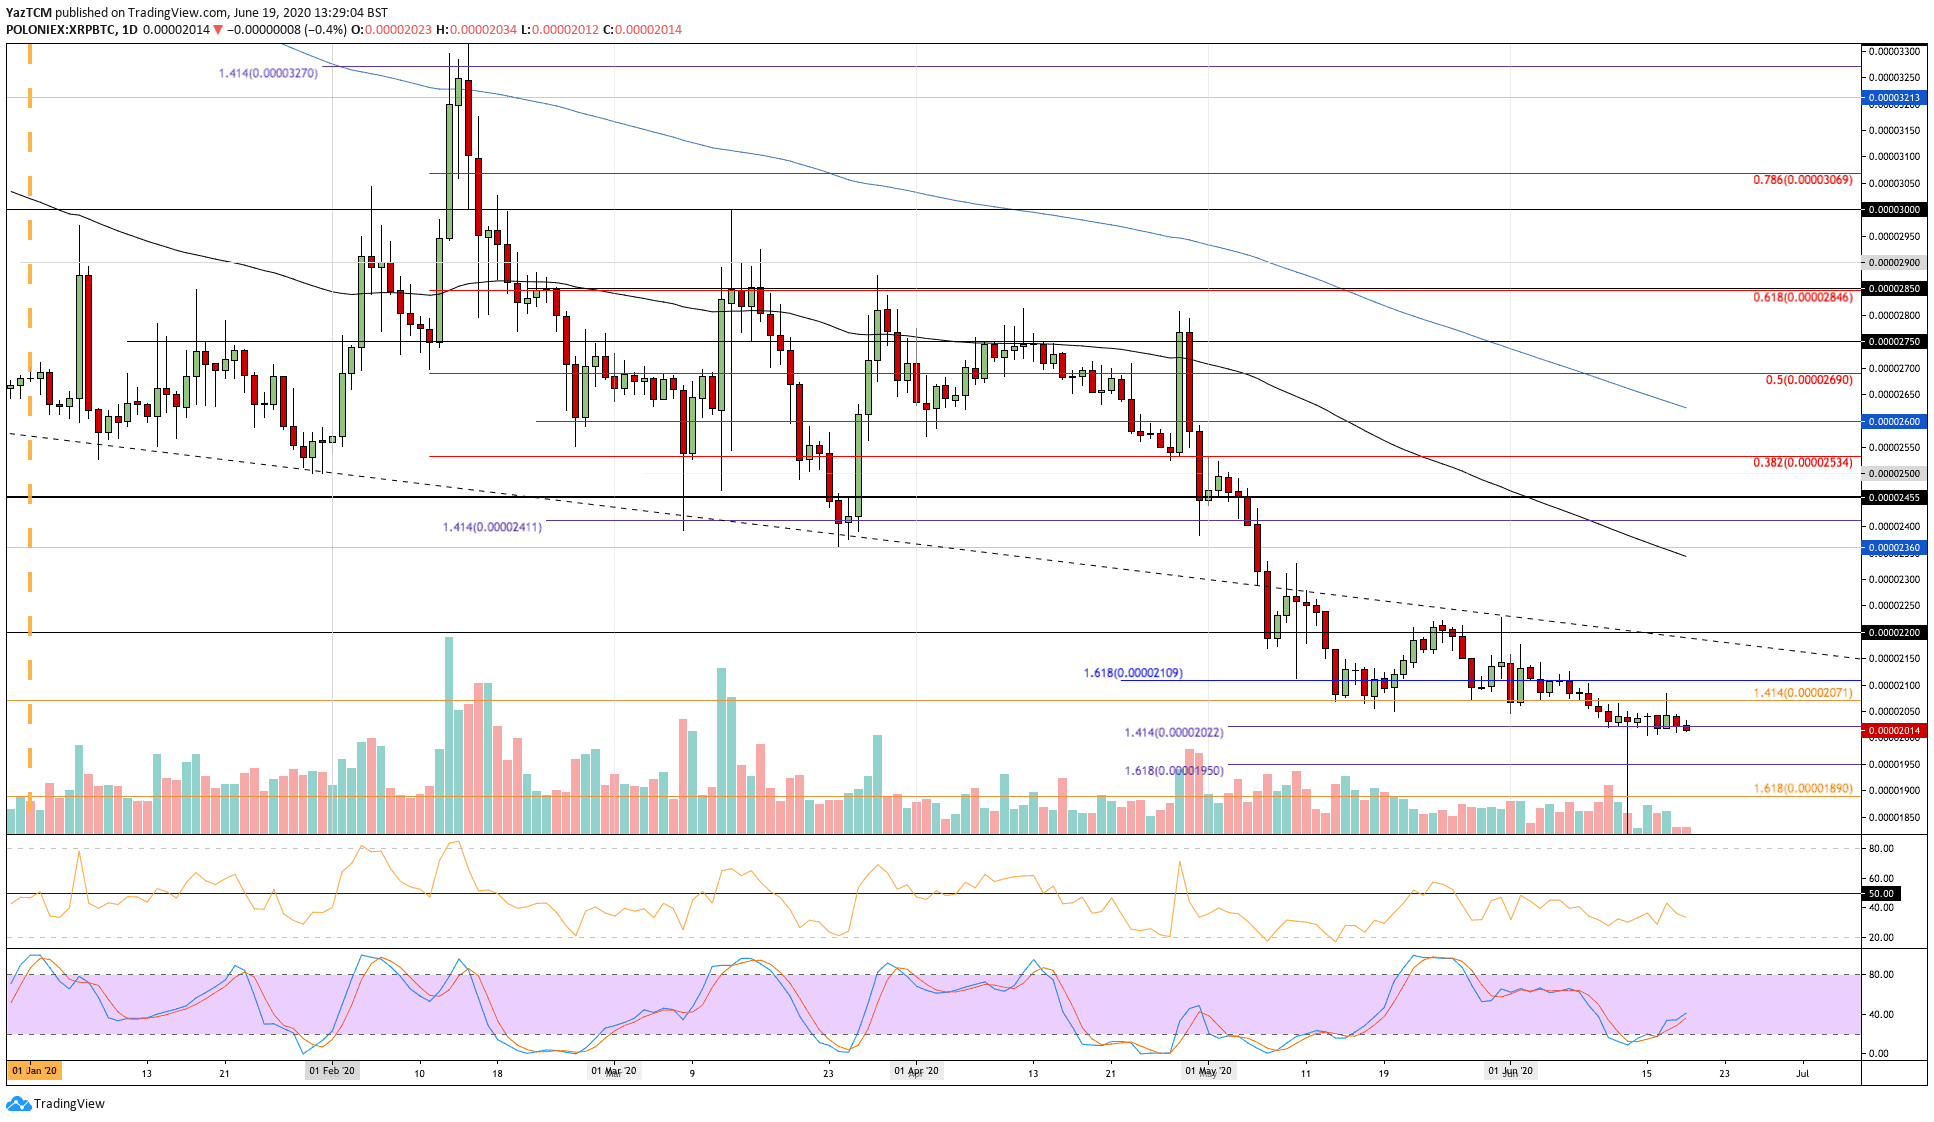 Crypto Price Analysis & Overview June 19th: Bitcoin, Ethereum, Ripple, Crypto.com, and Stellar